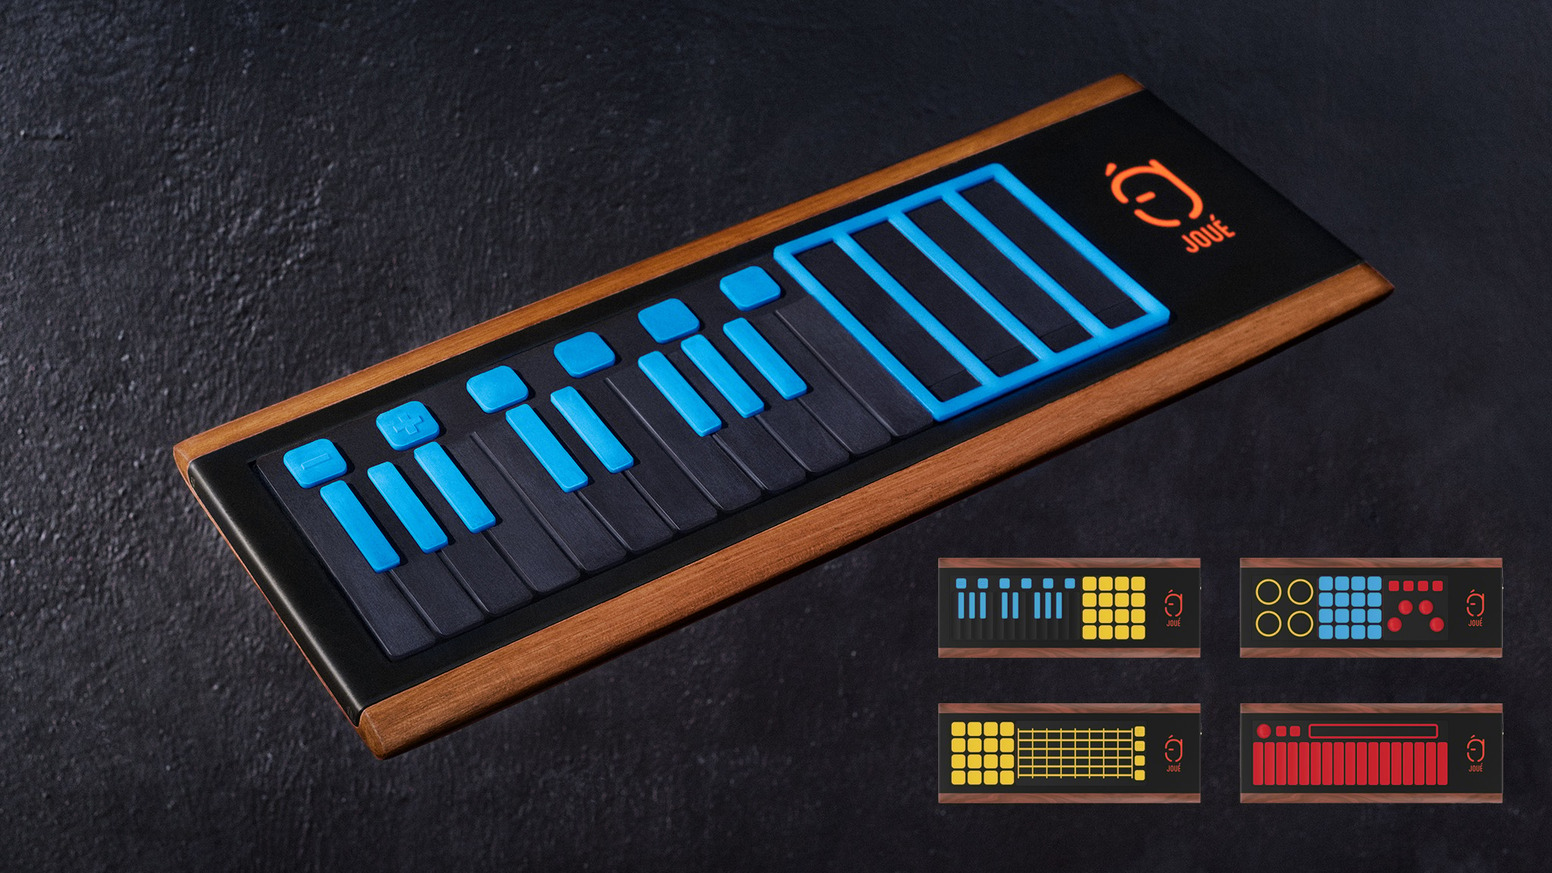 Joué is an innovative instrument simplifying digital music playing and offering a unique level of expressivity and spontaneity.